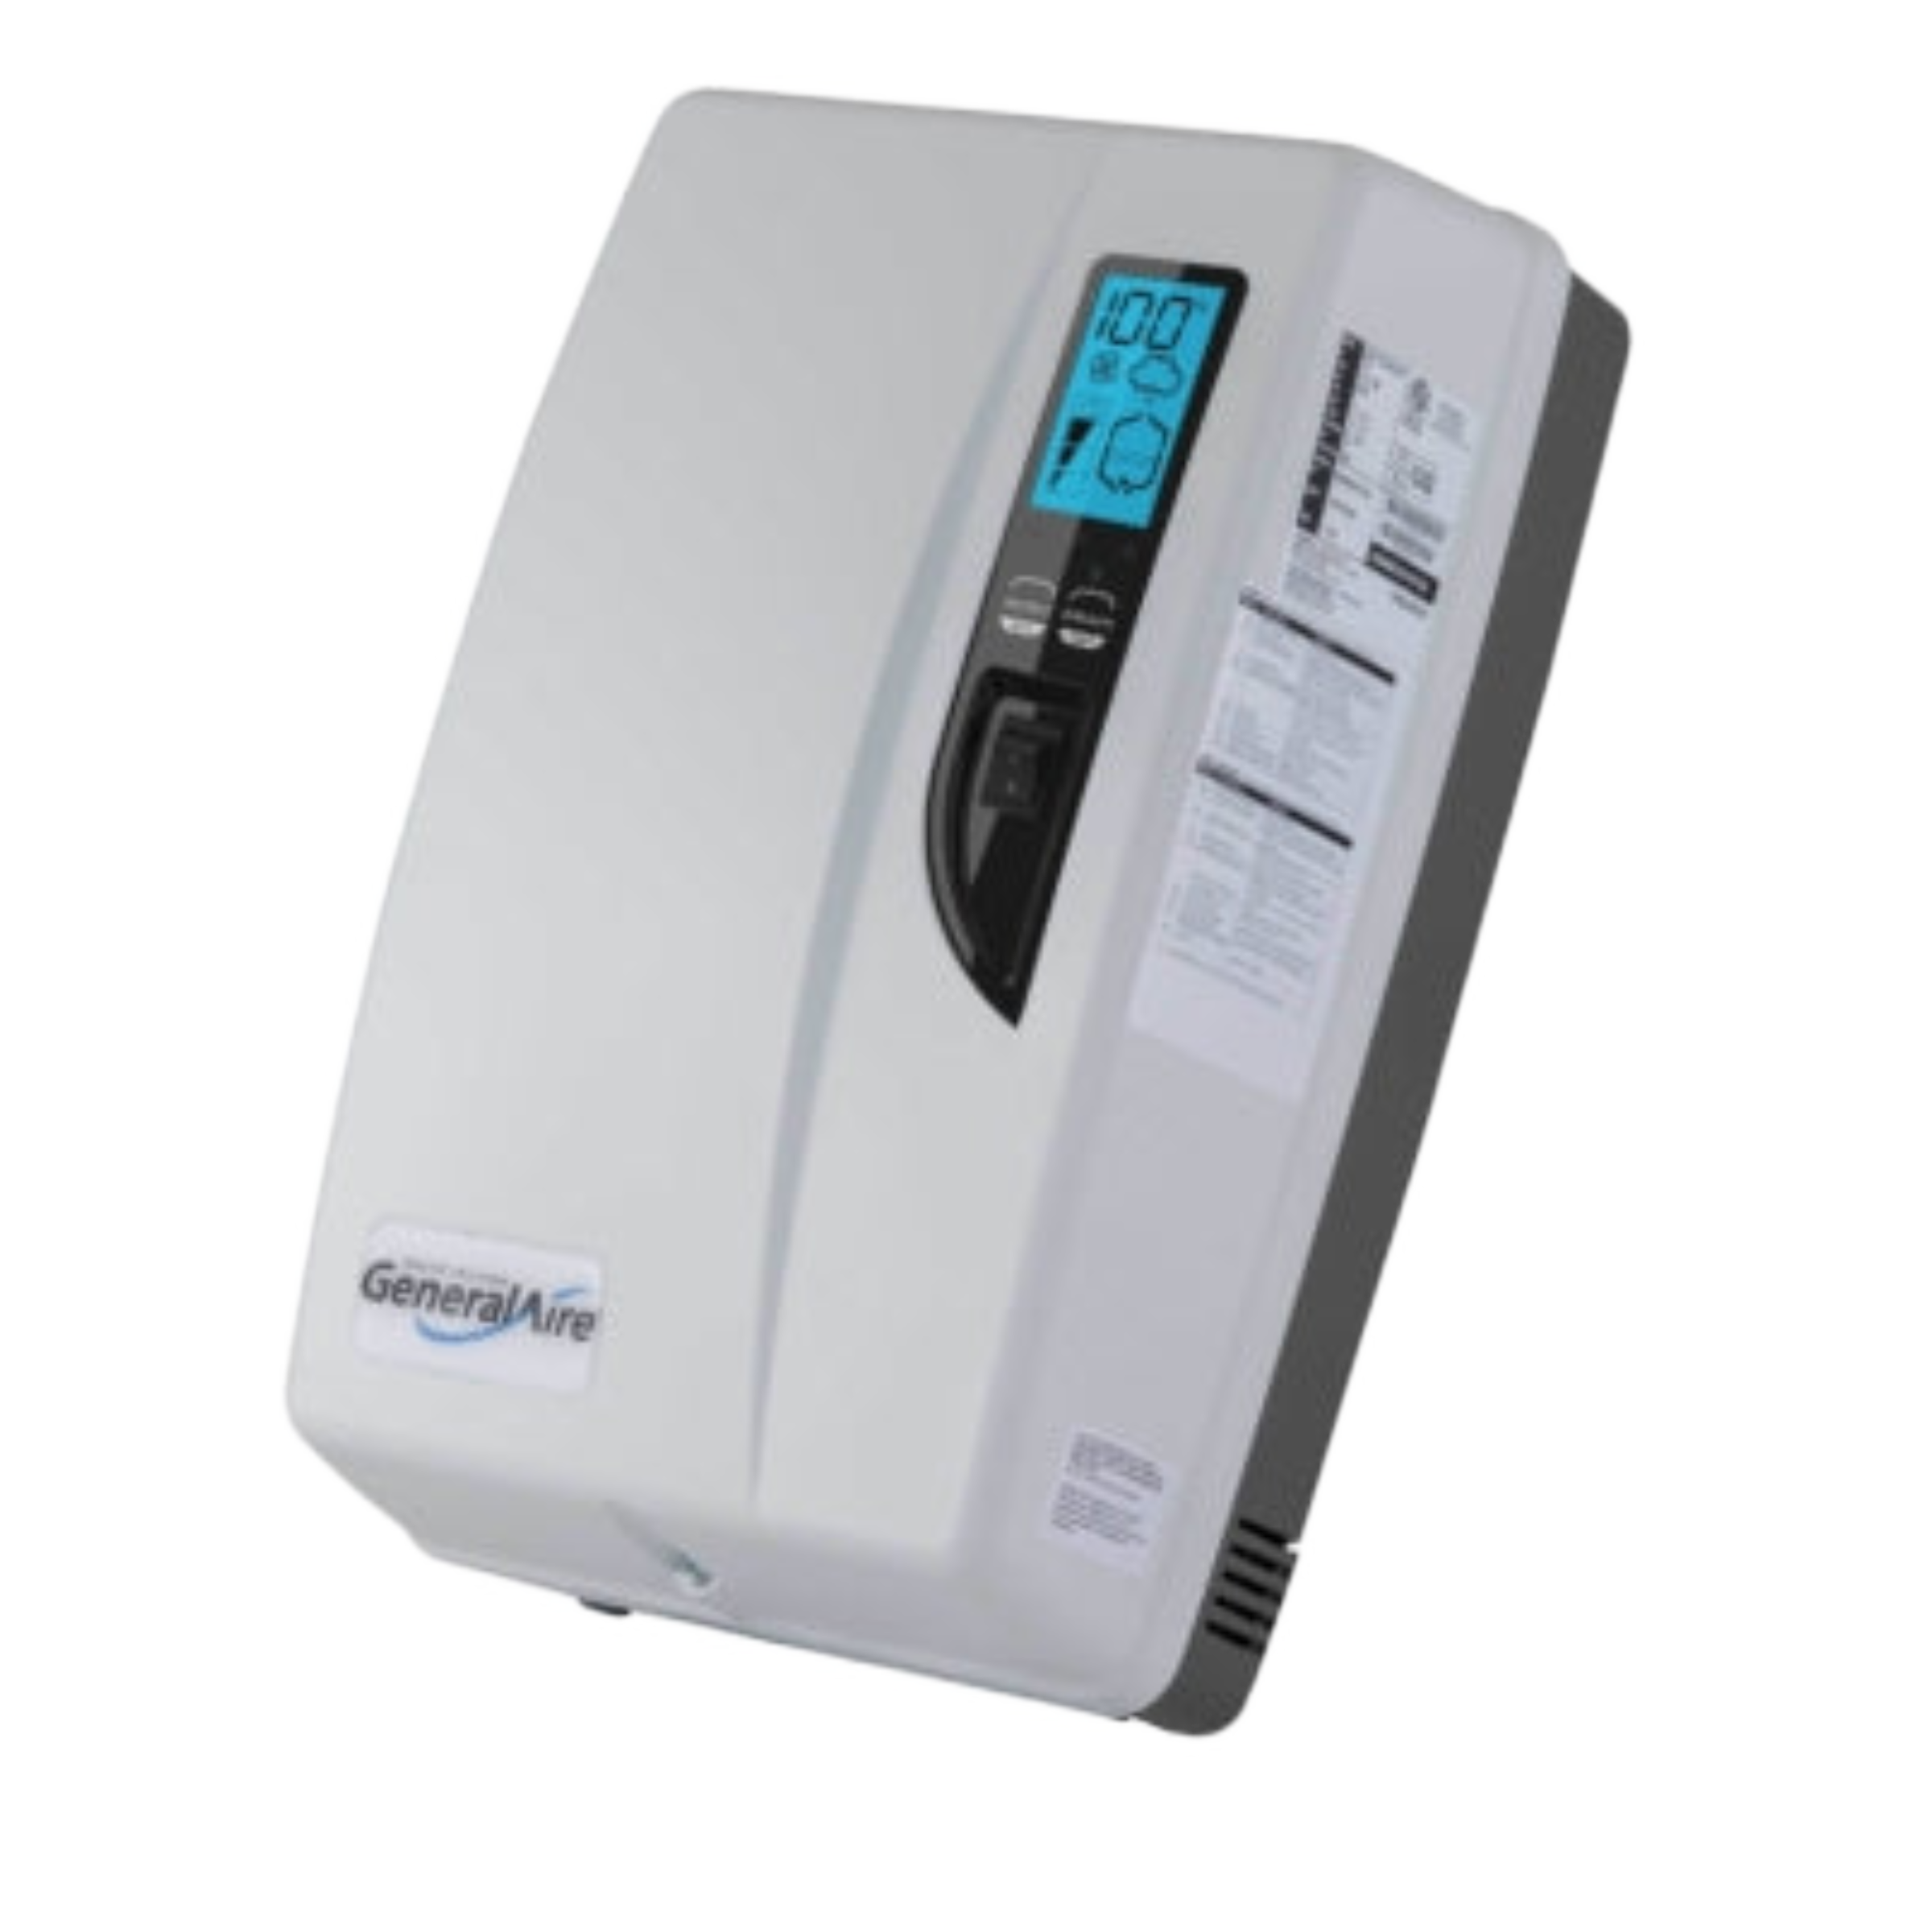 GeneralAire Model GF-5500 Residential Whole-House Steam Humidifier, 28.5 Gallon/Day Water Capacity, Full Coverage up to  5,000 sq. ft.